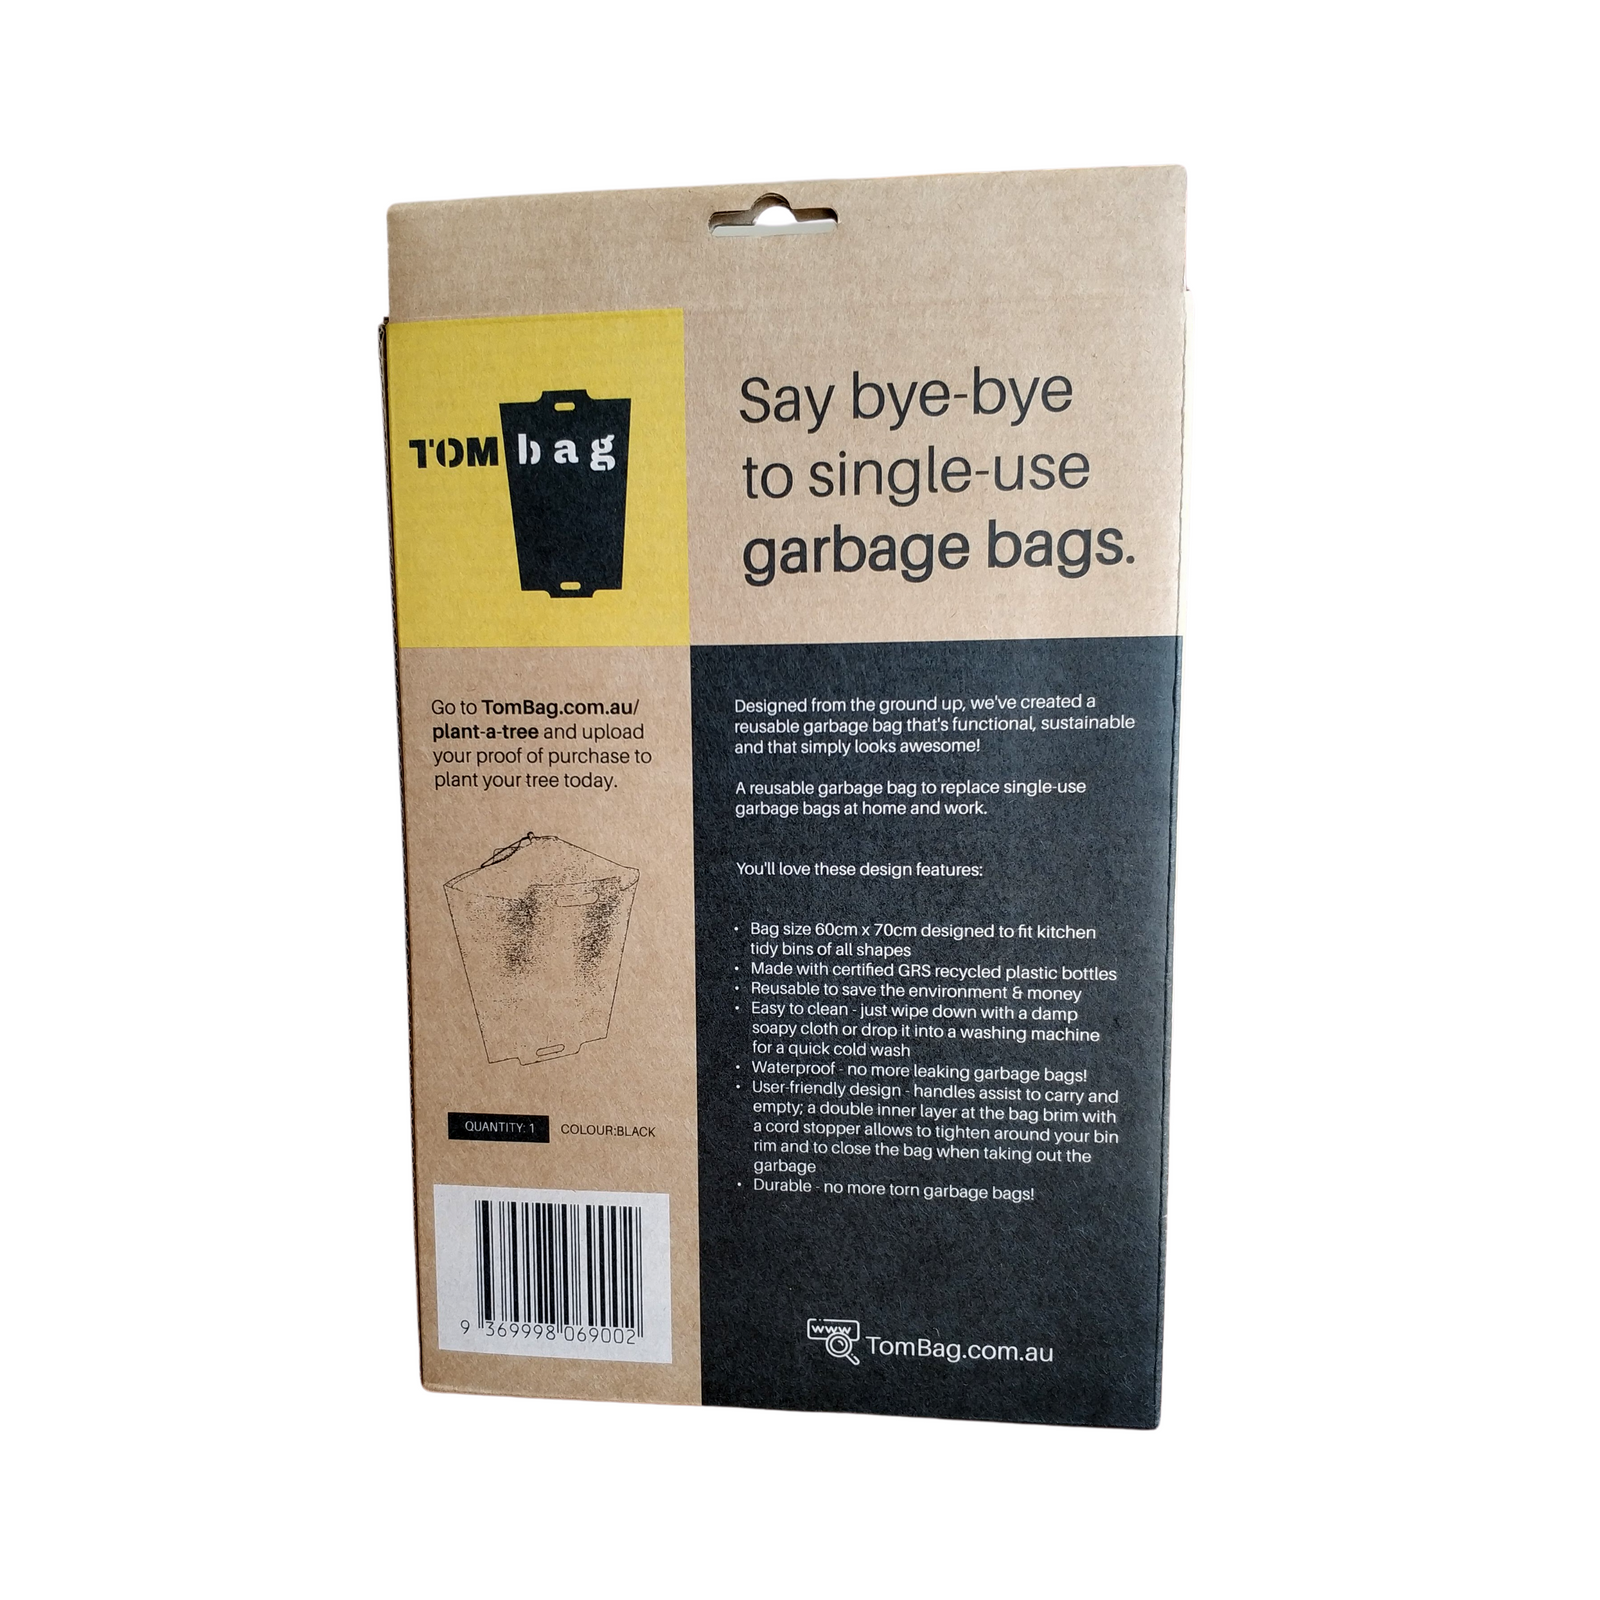 TOMbags are reusable trash bags you use for years